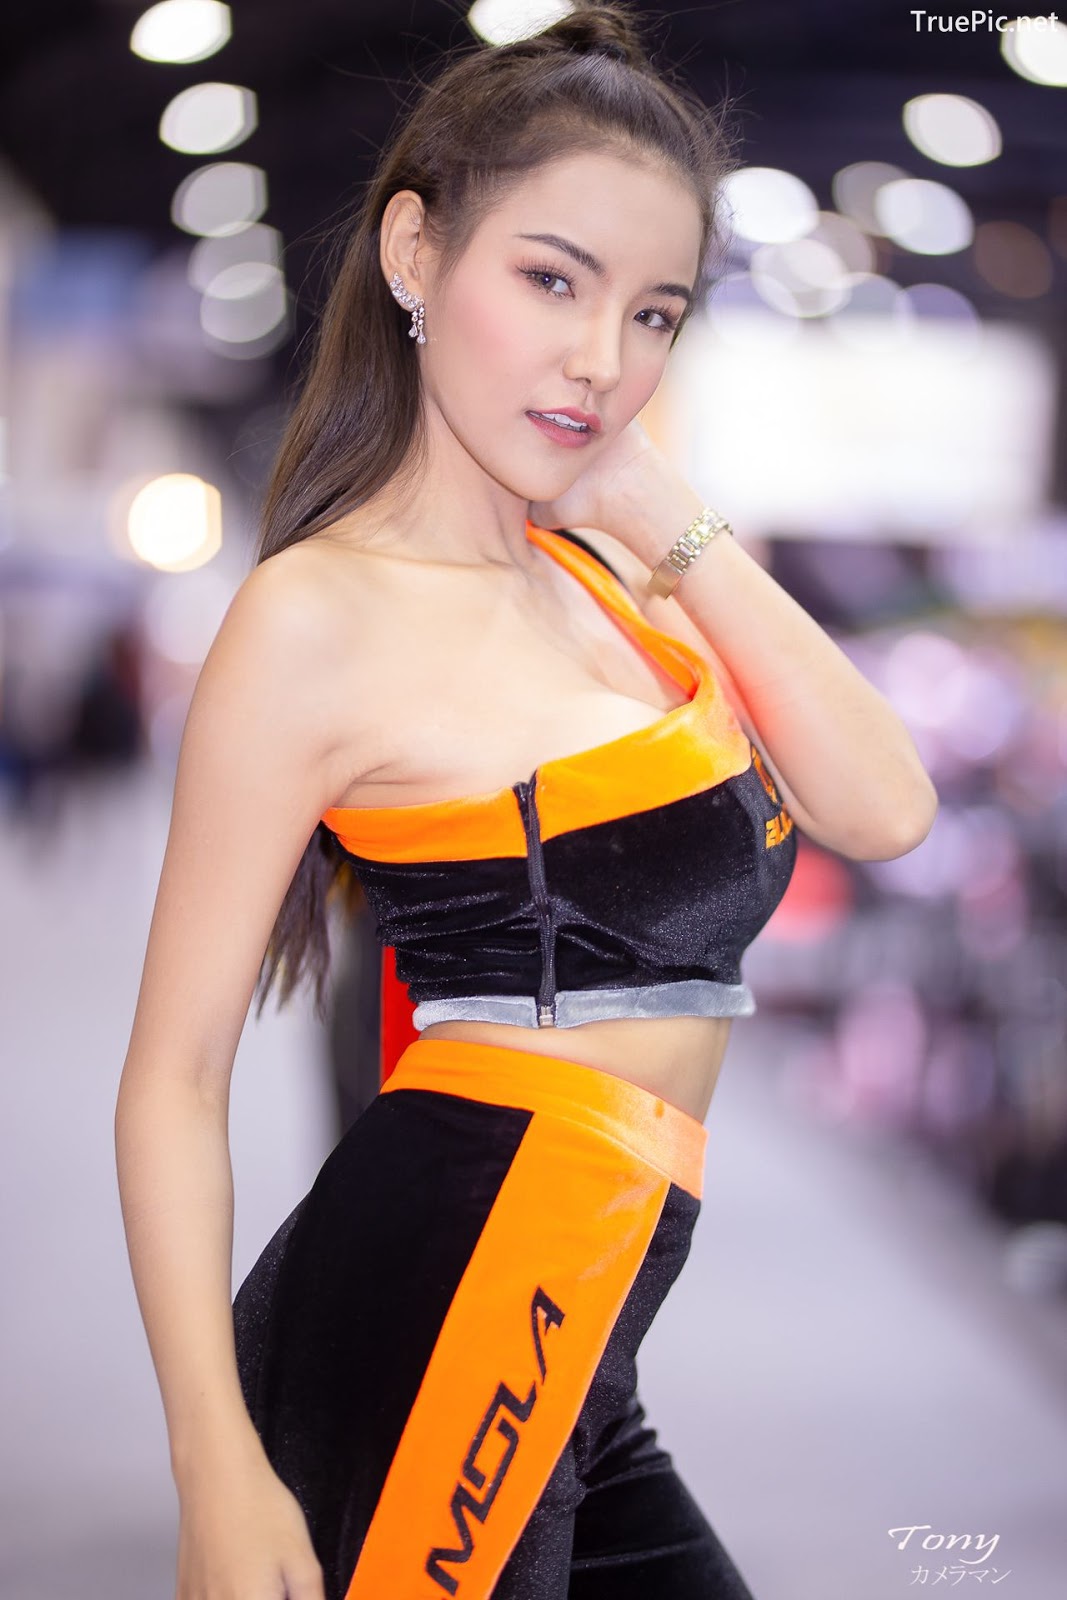 Thailand Hot Model Thai Racing Girl At Motor Expo Page Of Truepic Net